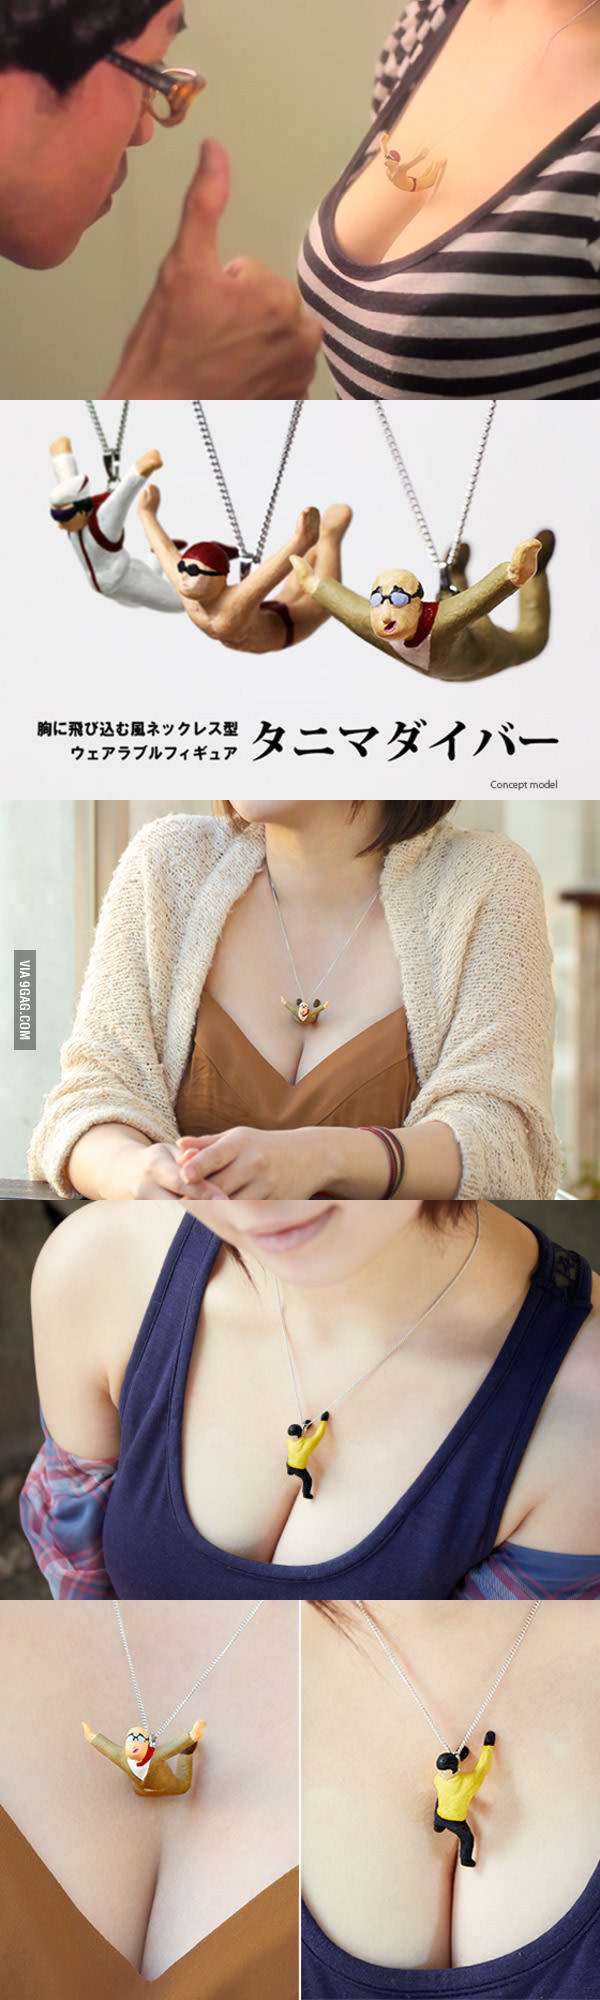 1boy 1girl 9gag cleavage female funny male necklace